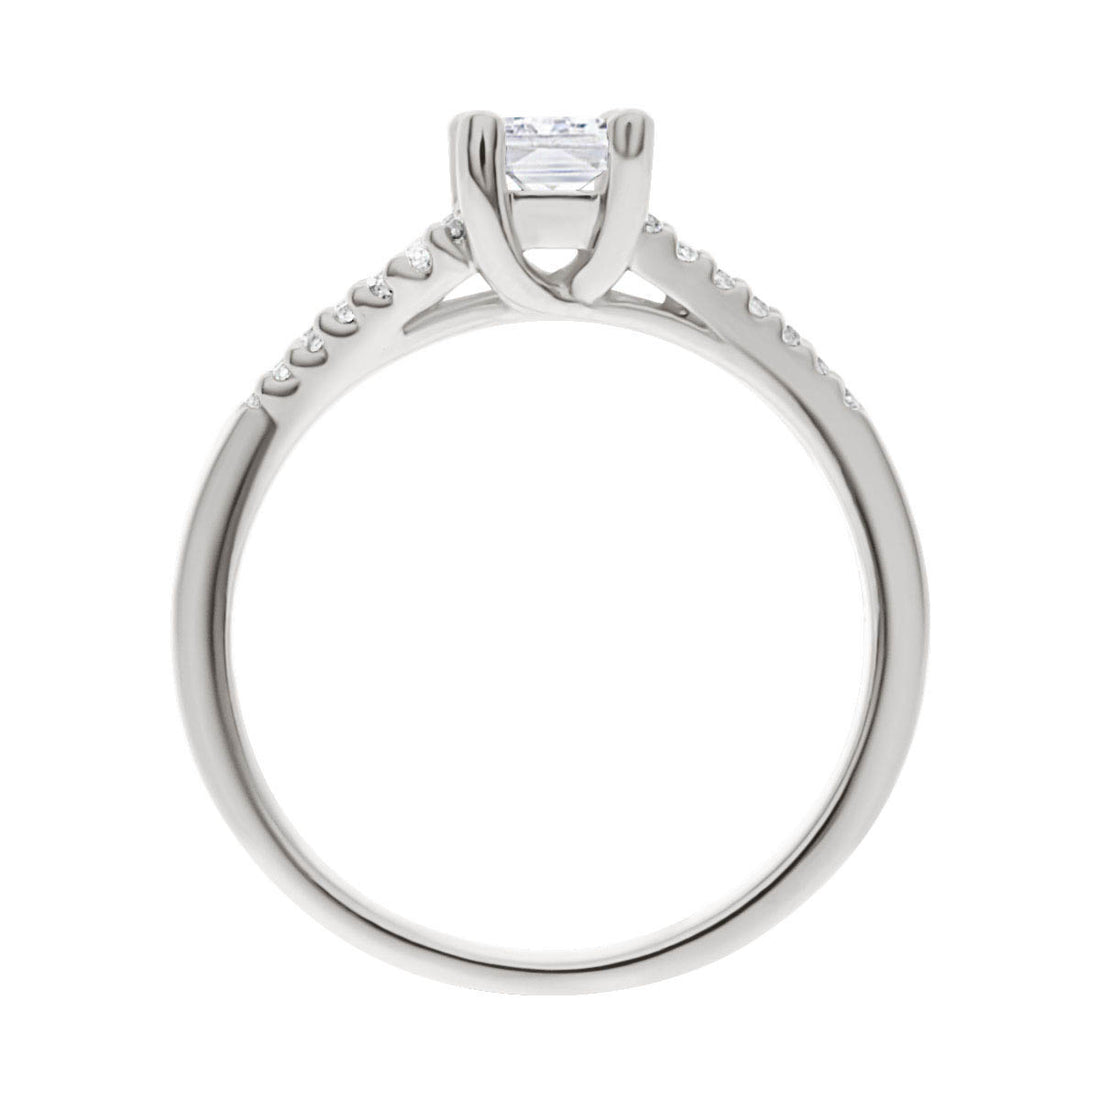 Radiant Cut Diamond Ring in white gold standing upright